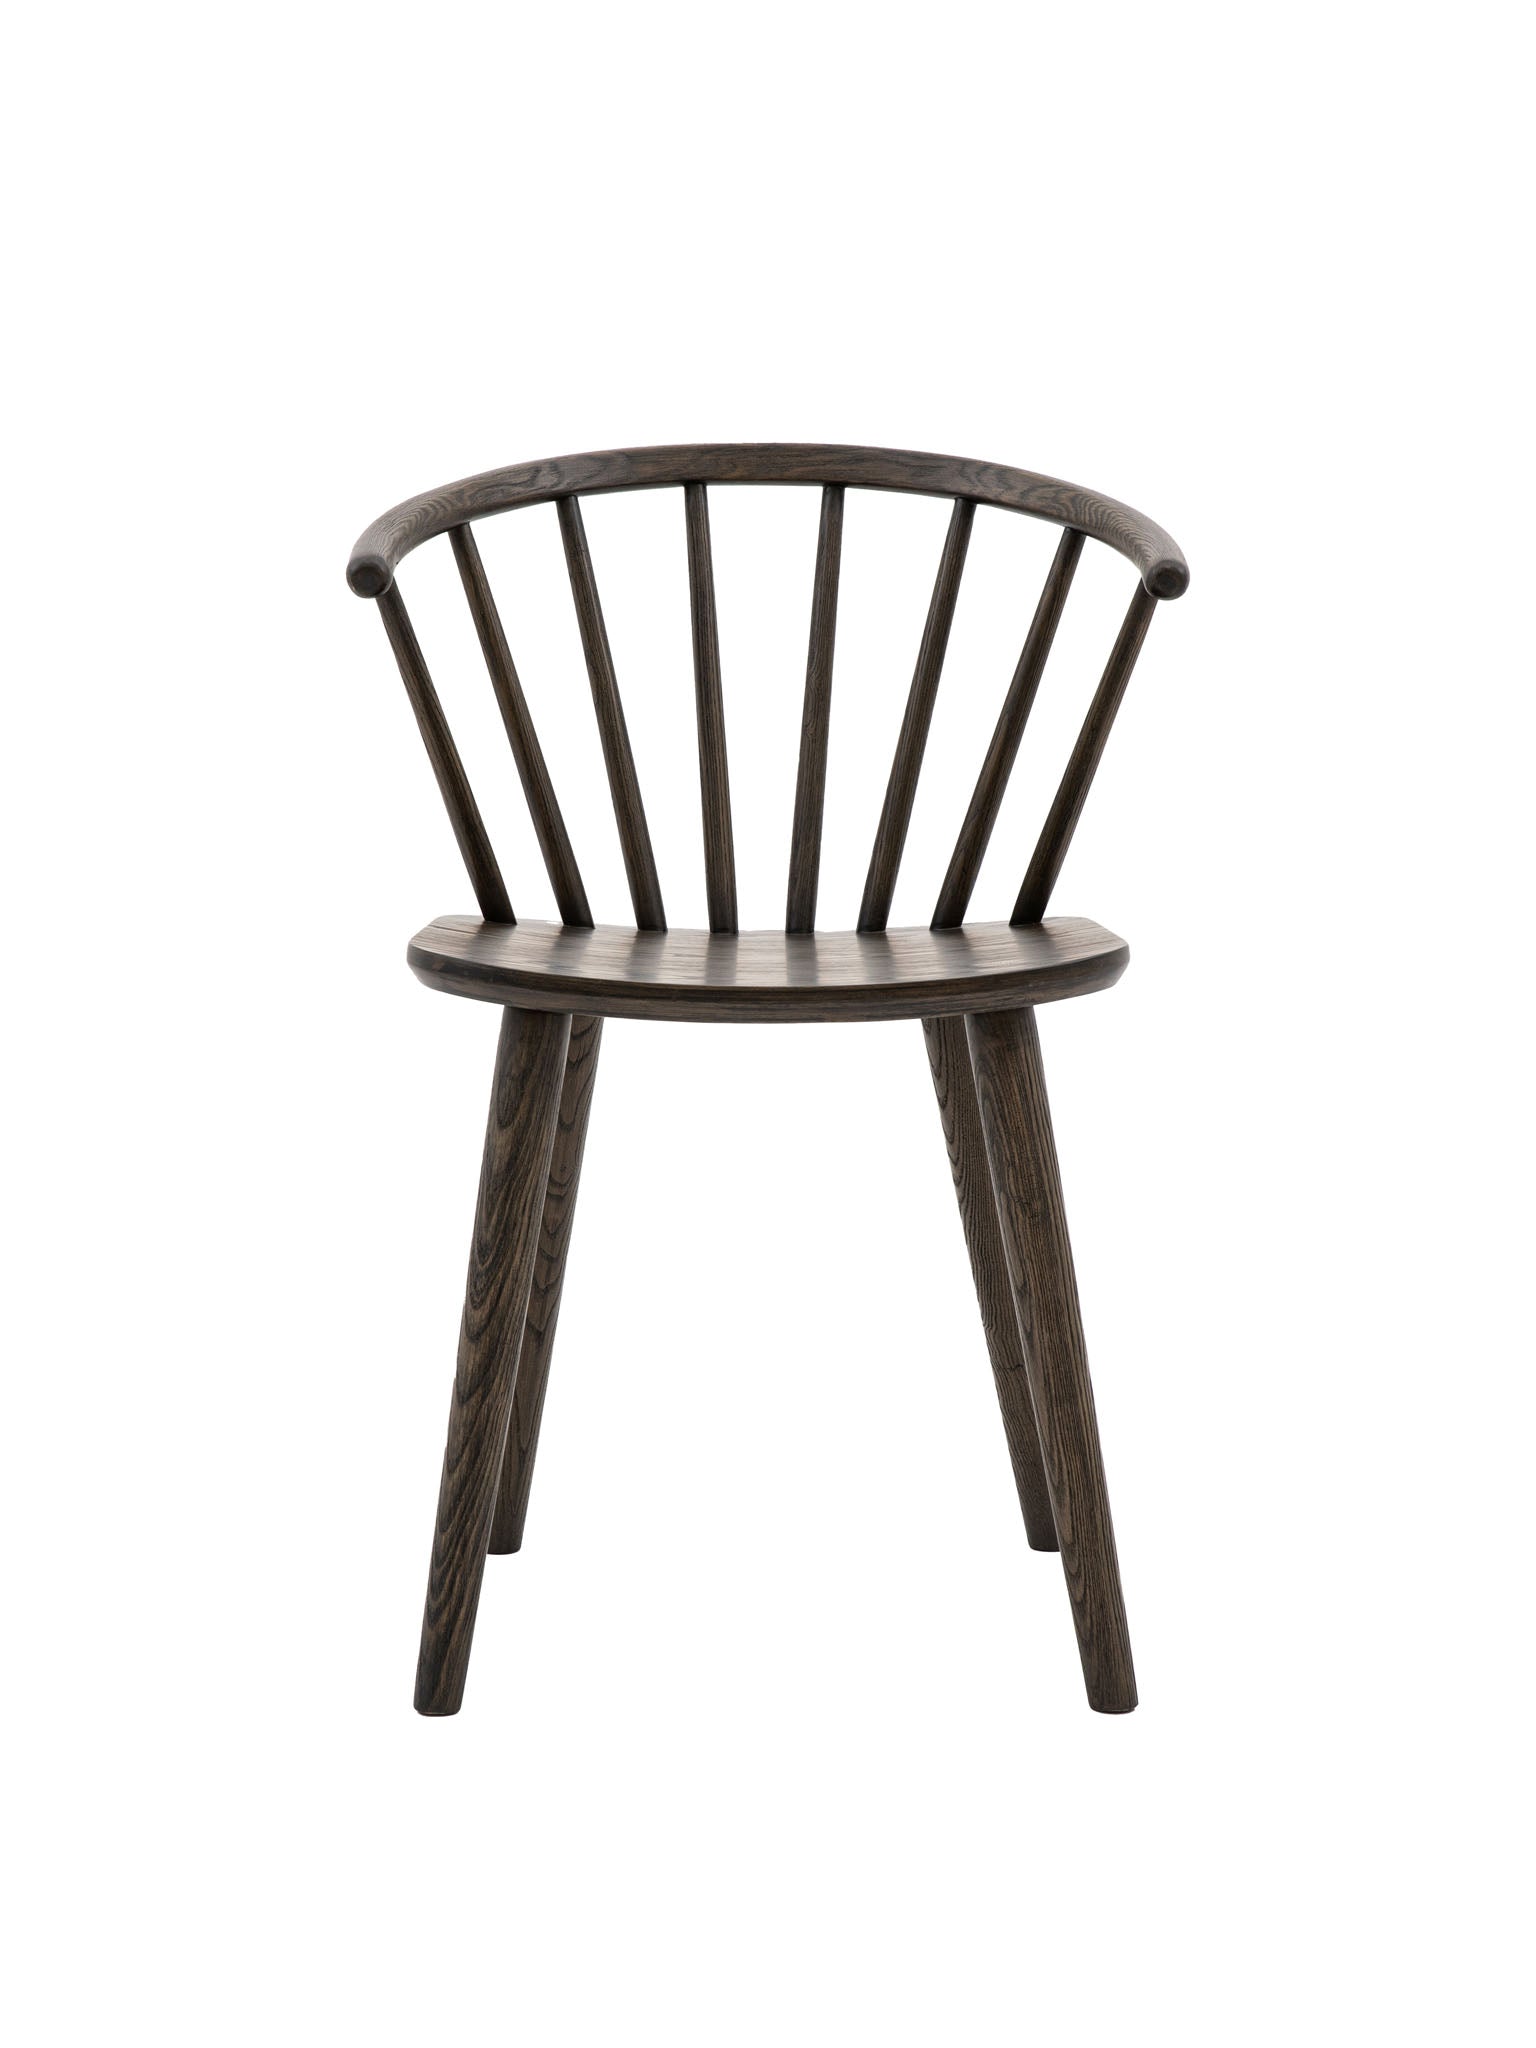 Wooden Dining chair with spindle back and curved seat